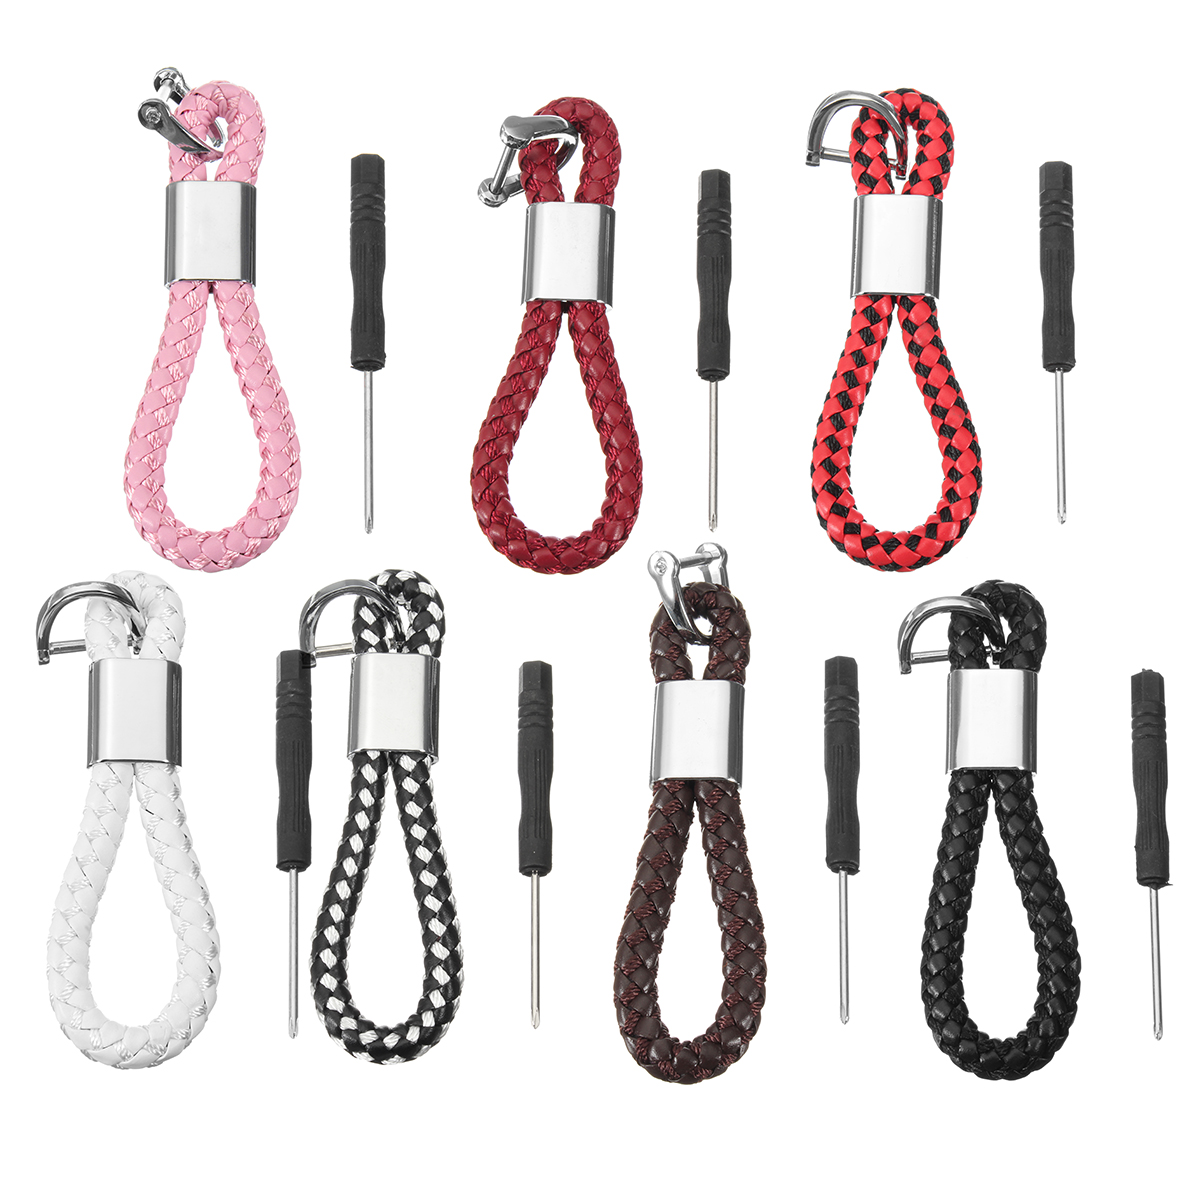 PU-Leather-Braided-Strap-Key-Chain-Stainless-Key-ring-7-Different-Colors-1191604-2